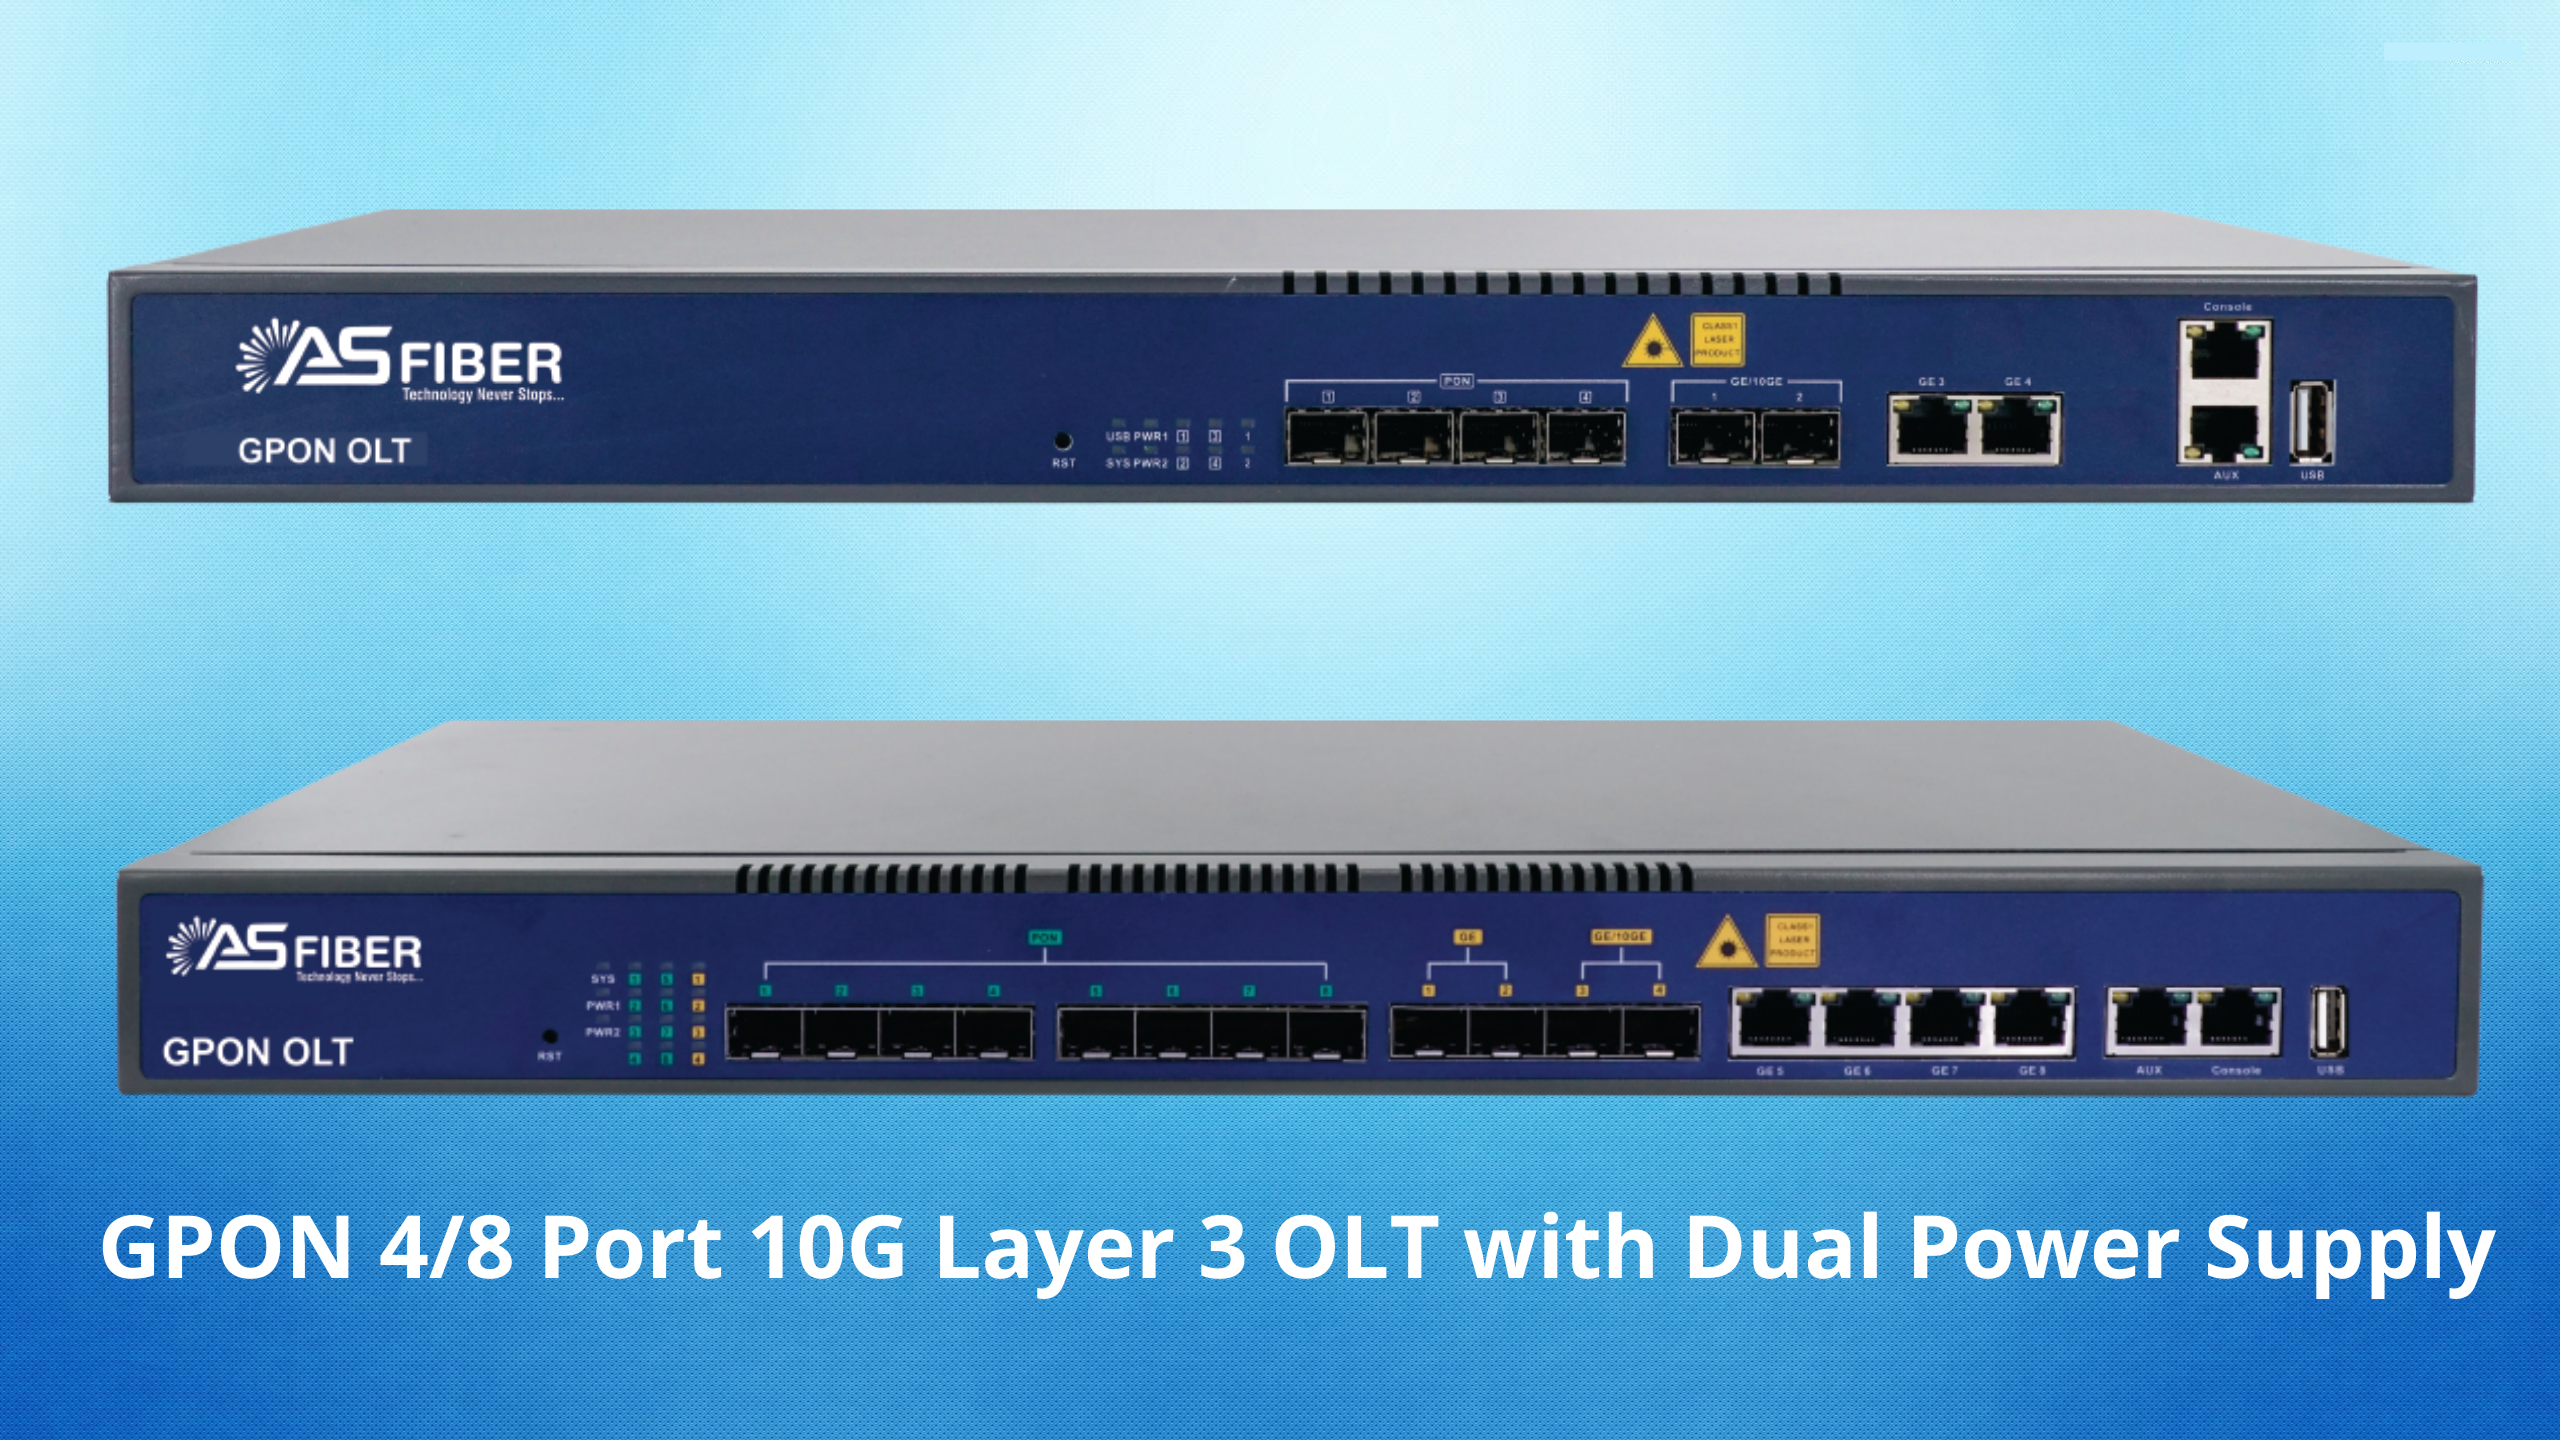 GPON 48 Port 10G Layer 3 OLT with Dual Power Supply (1)